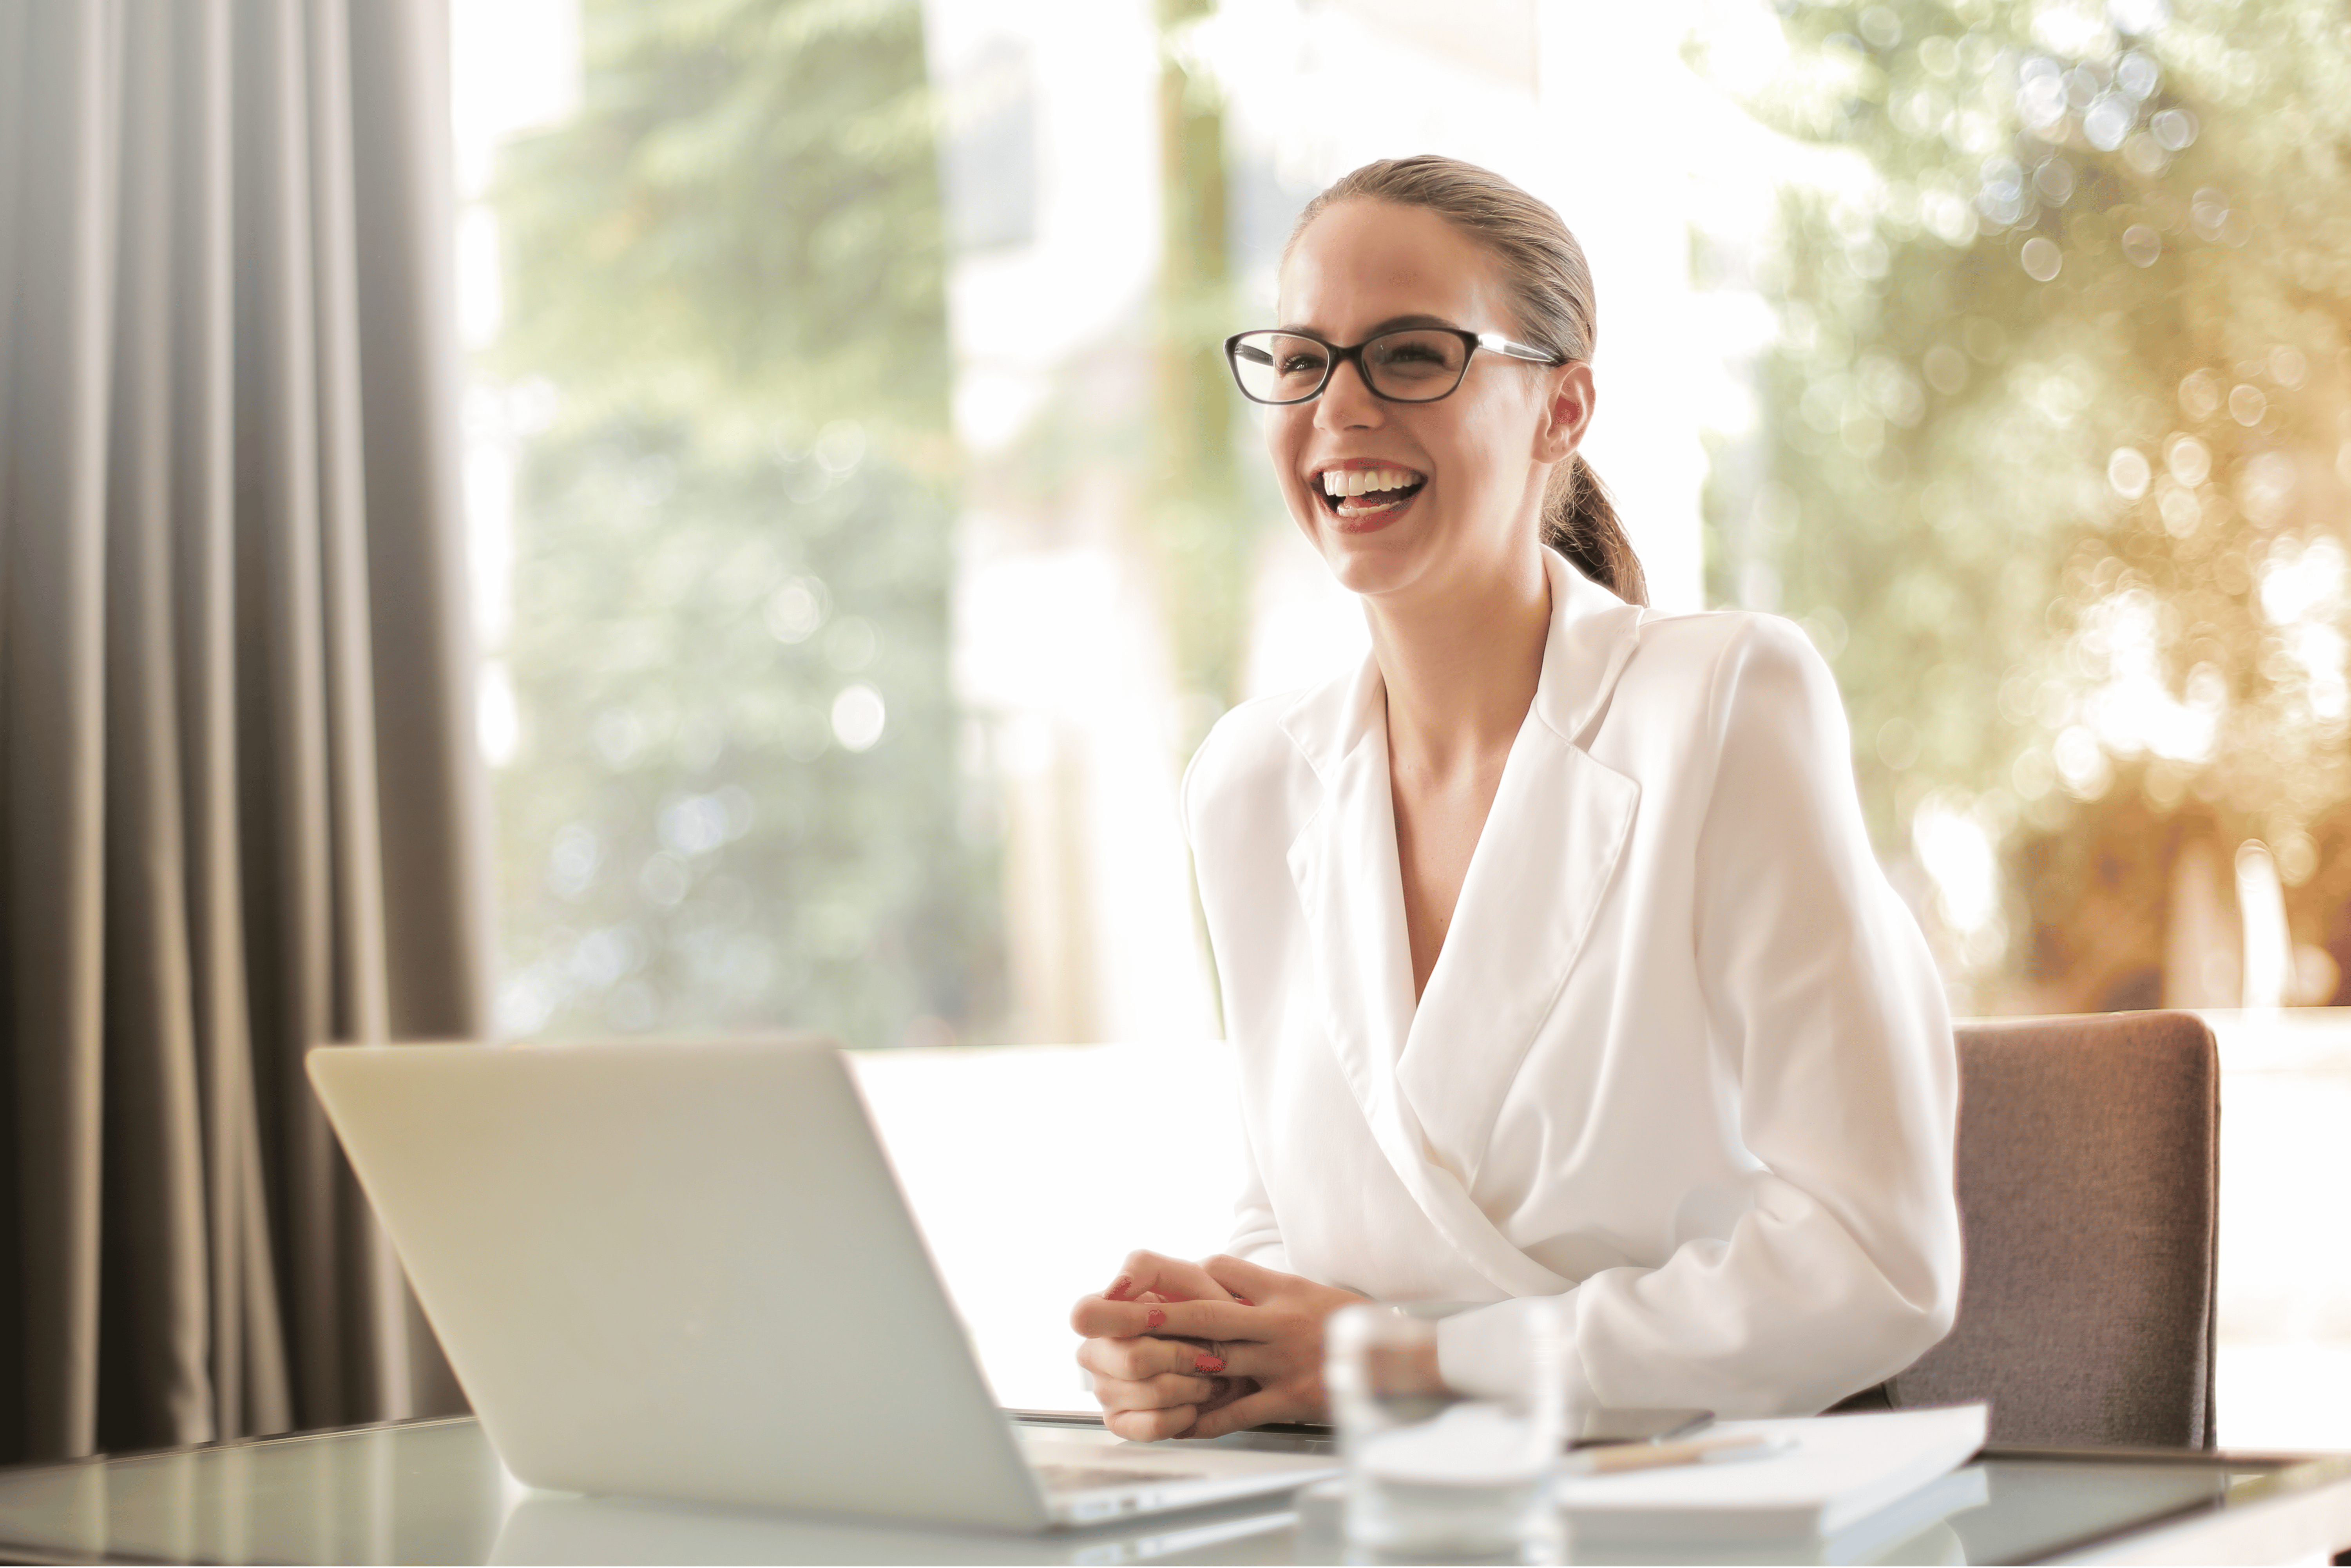 Image: A confident and empowered woman in a white blouse, smiling, symbolizing the positive and impactful outcomes of entrepreneur coaching.